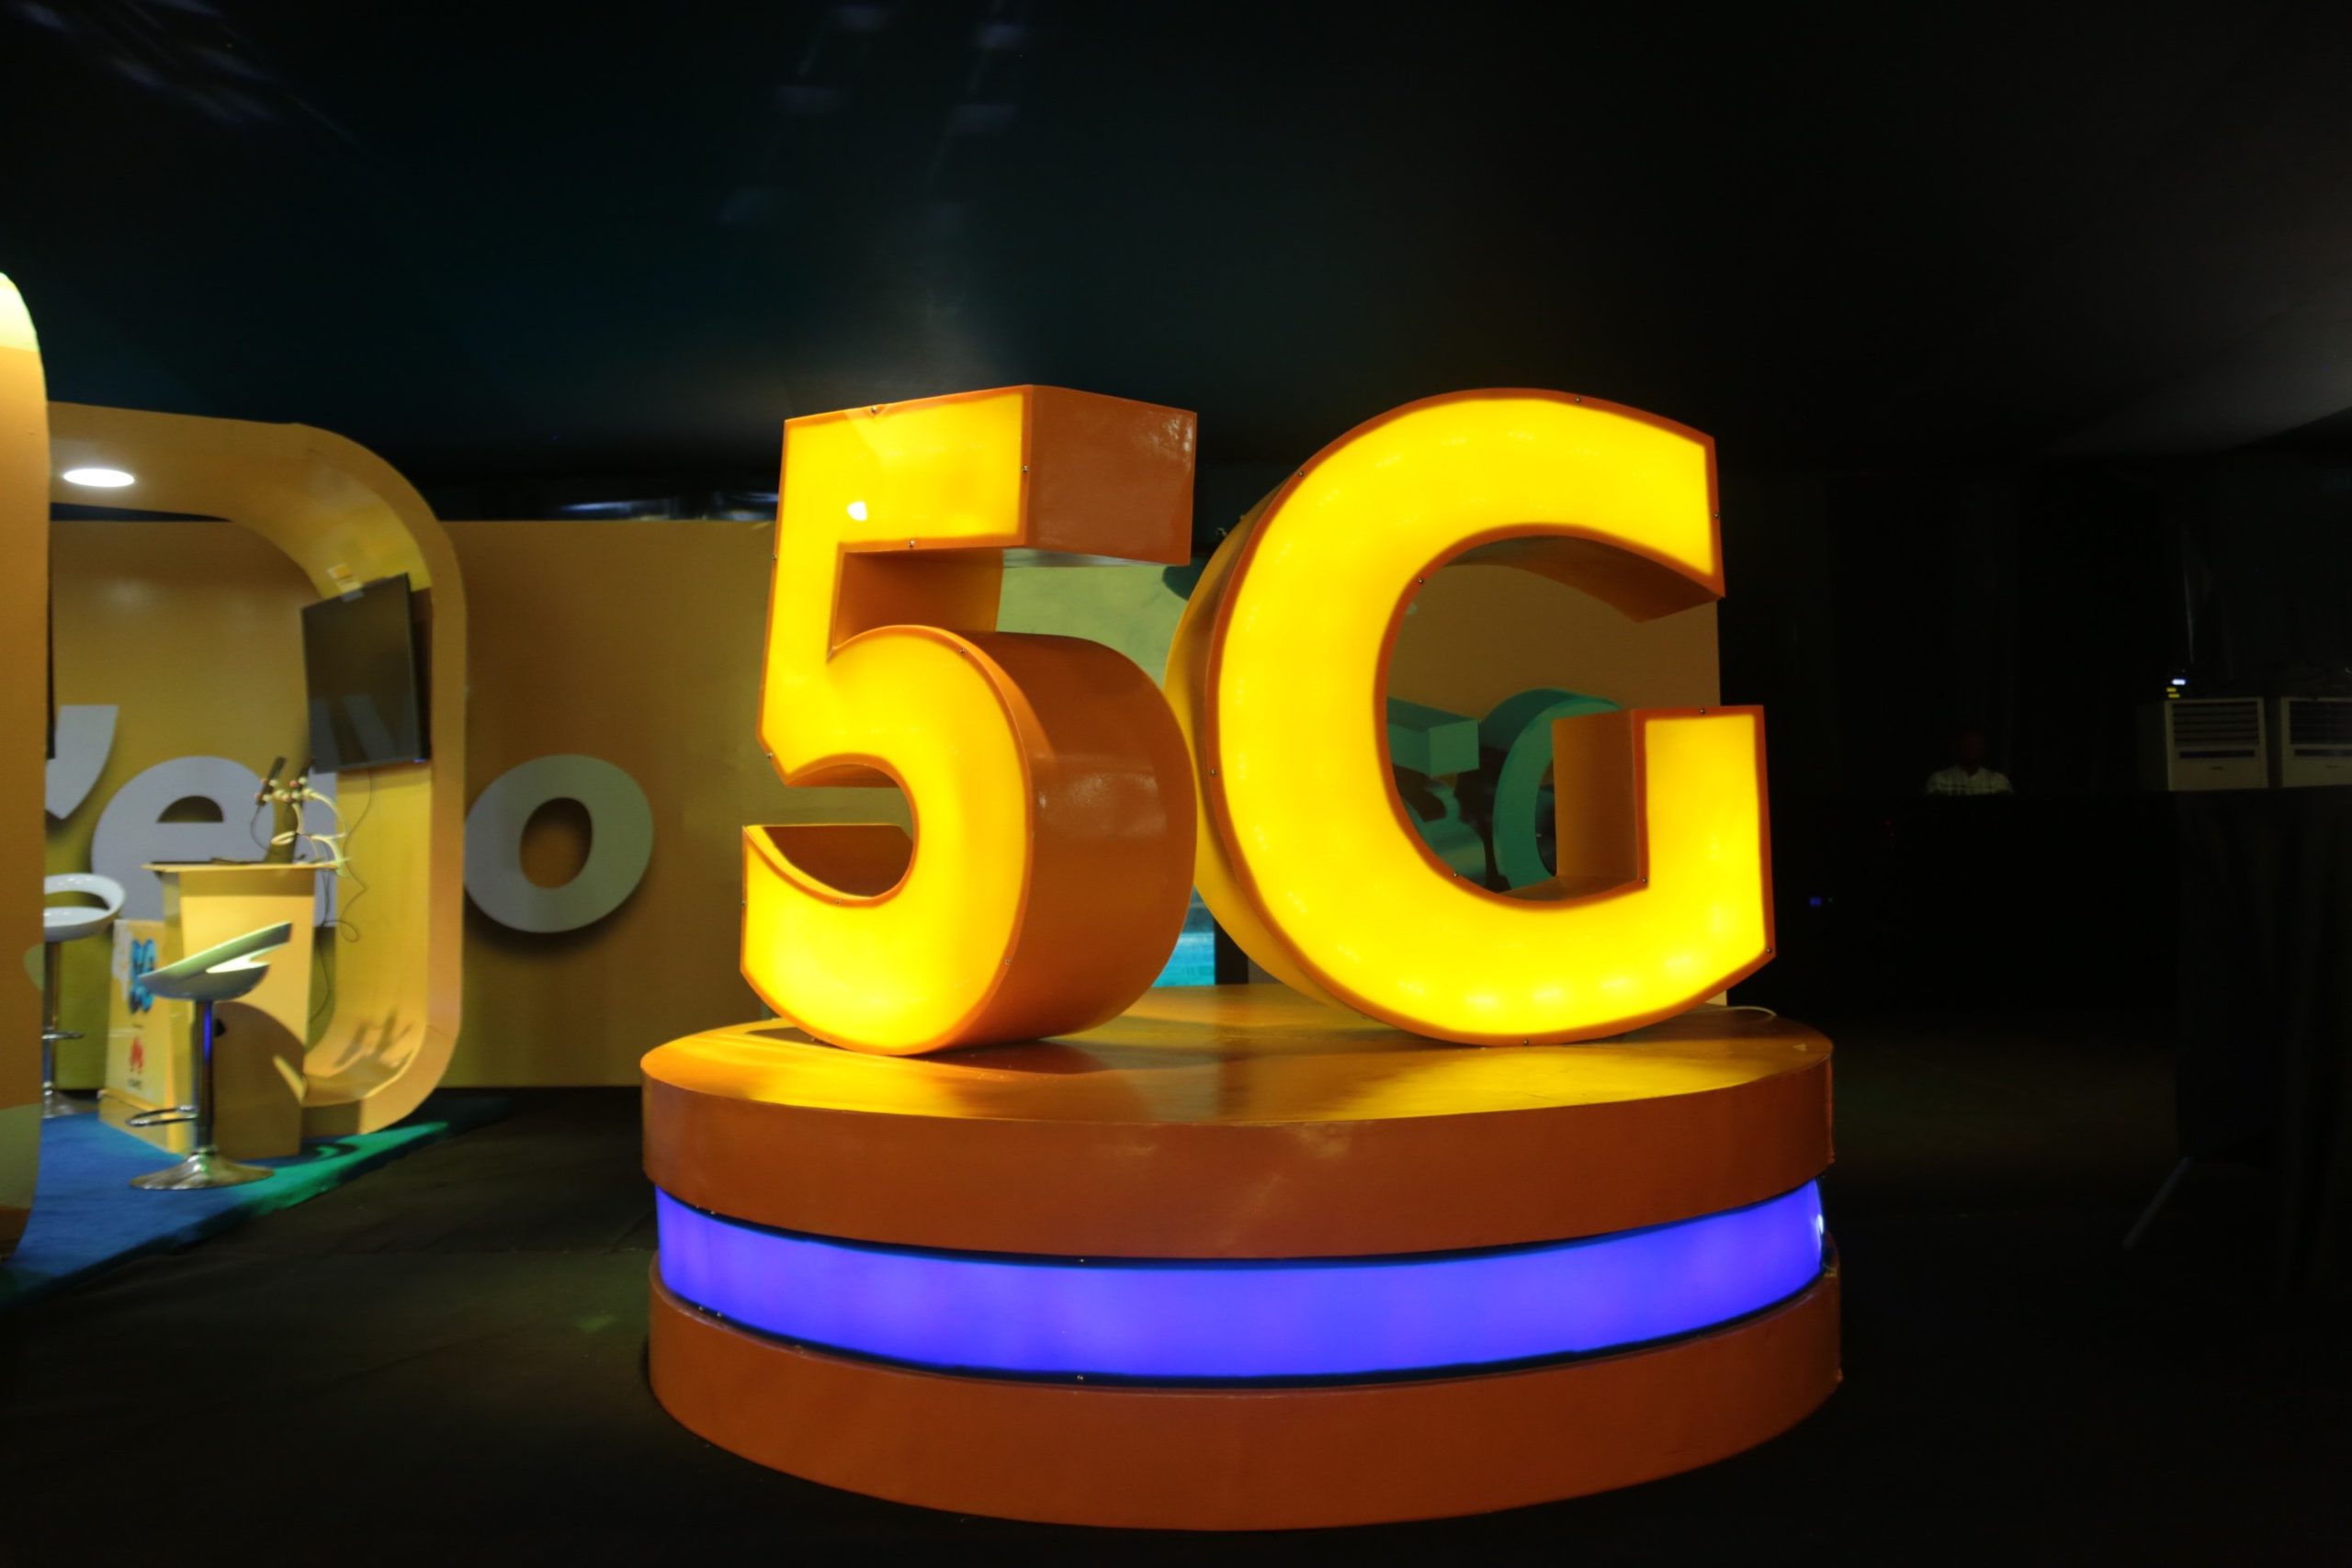 MTN LAUNCHES 5G IN NIGERIA